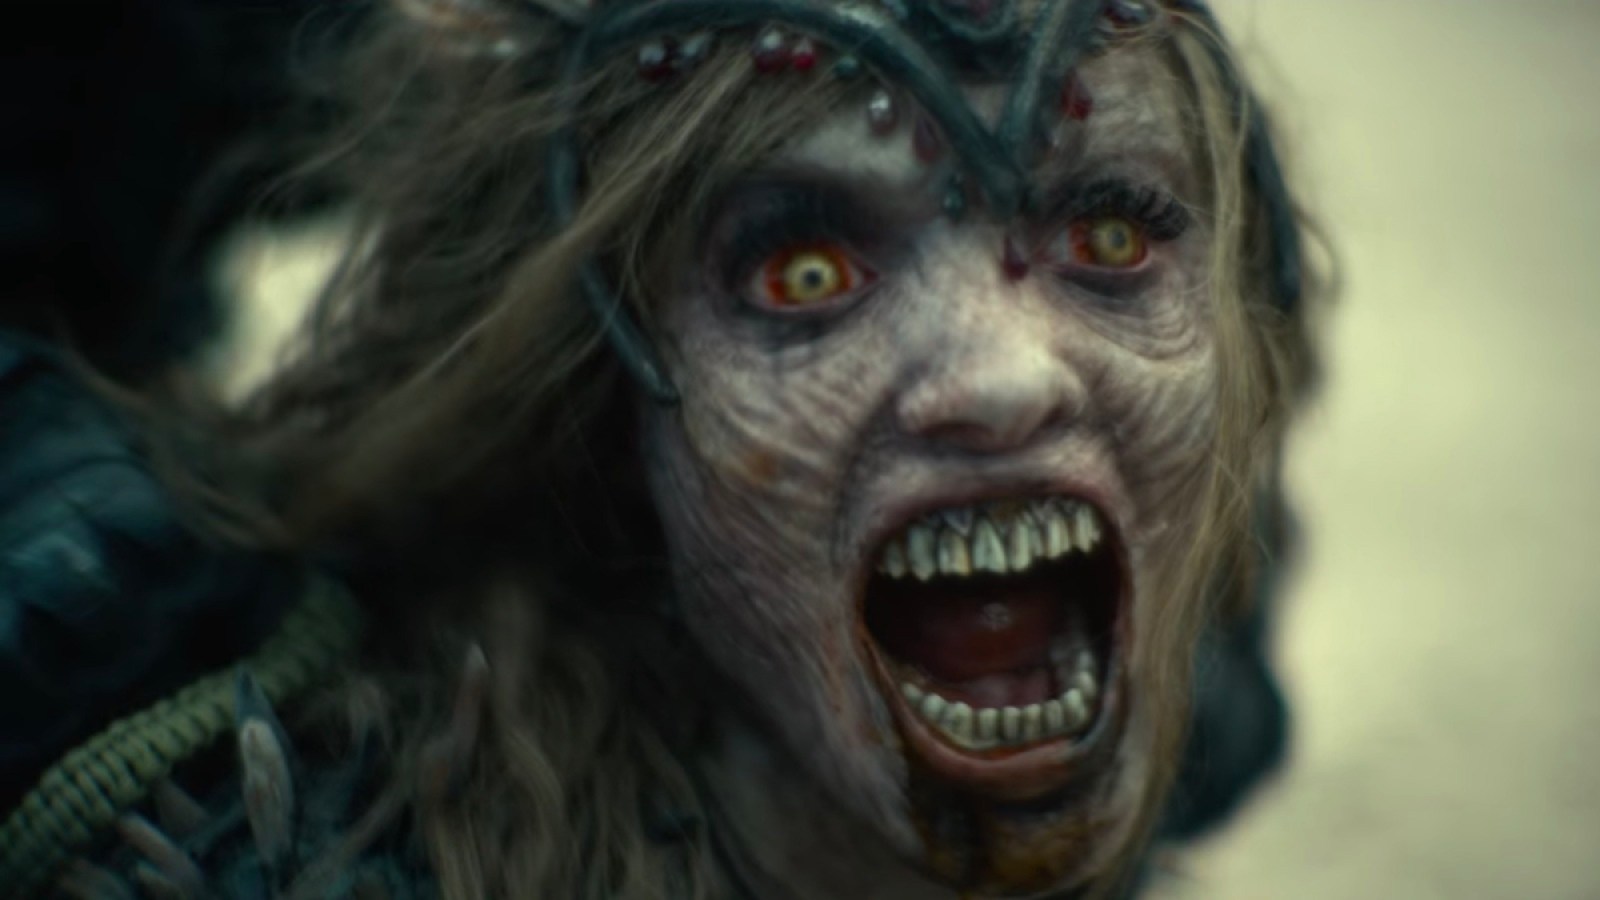 The zombie queen in 'Army of the Dead'